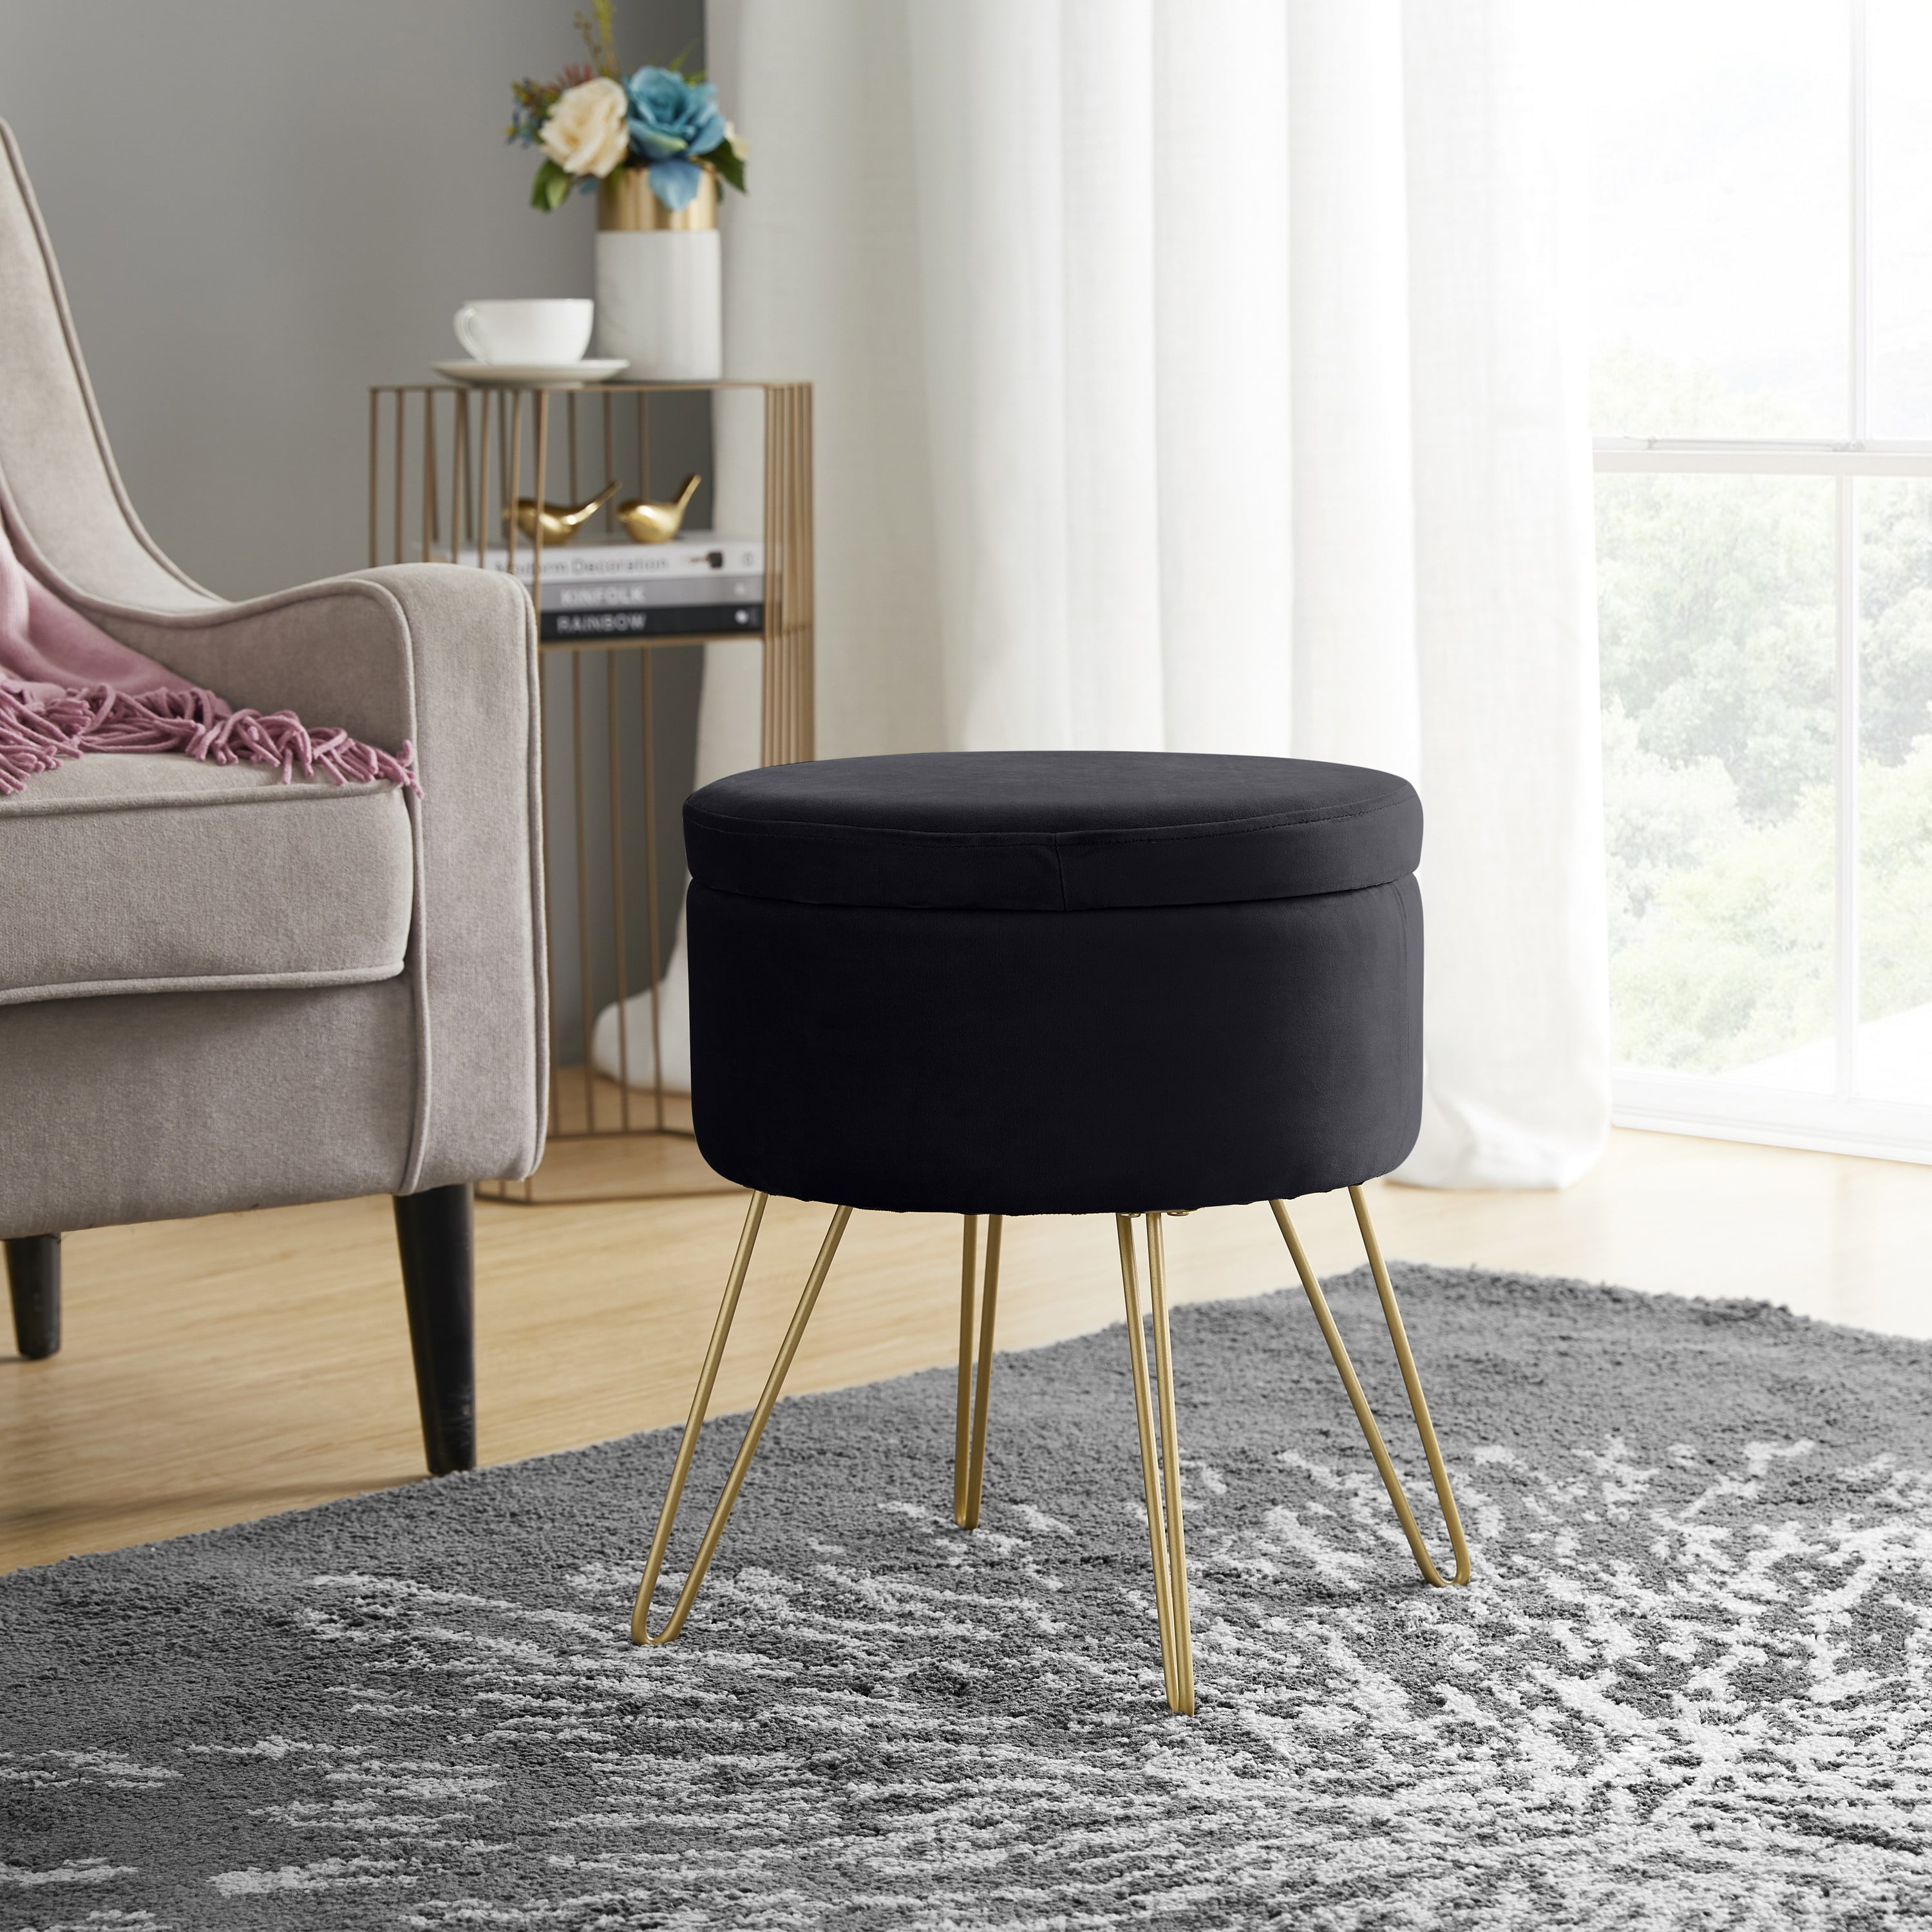 LIFA LIVING Round Velvet Ottoman with Gold Metal Legs Retro Coffee Side Table Bedroom Gold Modern Dressing Chair for Living Room 100 kg Capacity Upholstered Footstool Pouf 55 x 35cm 